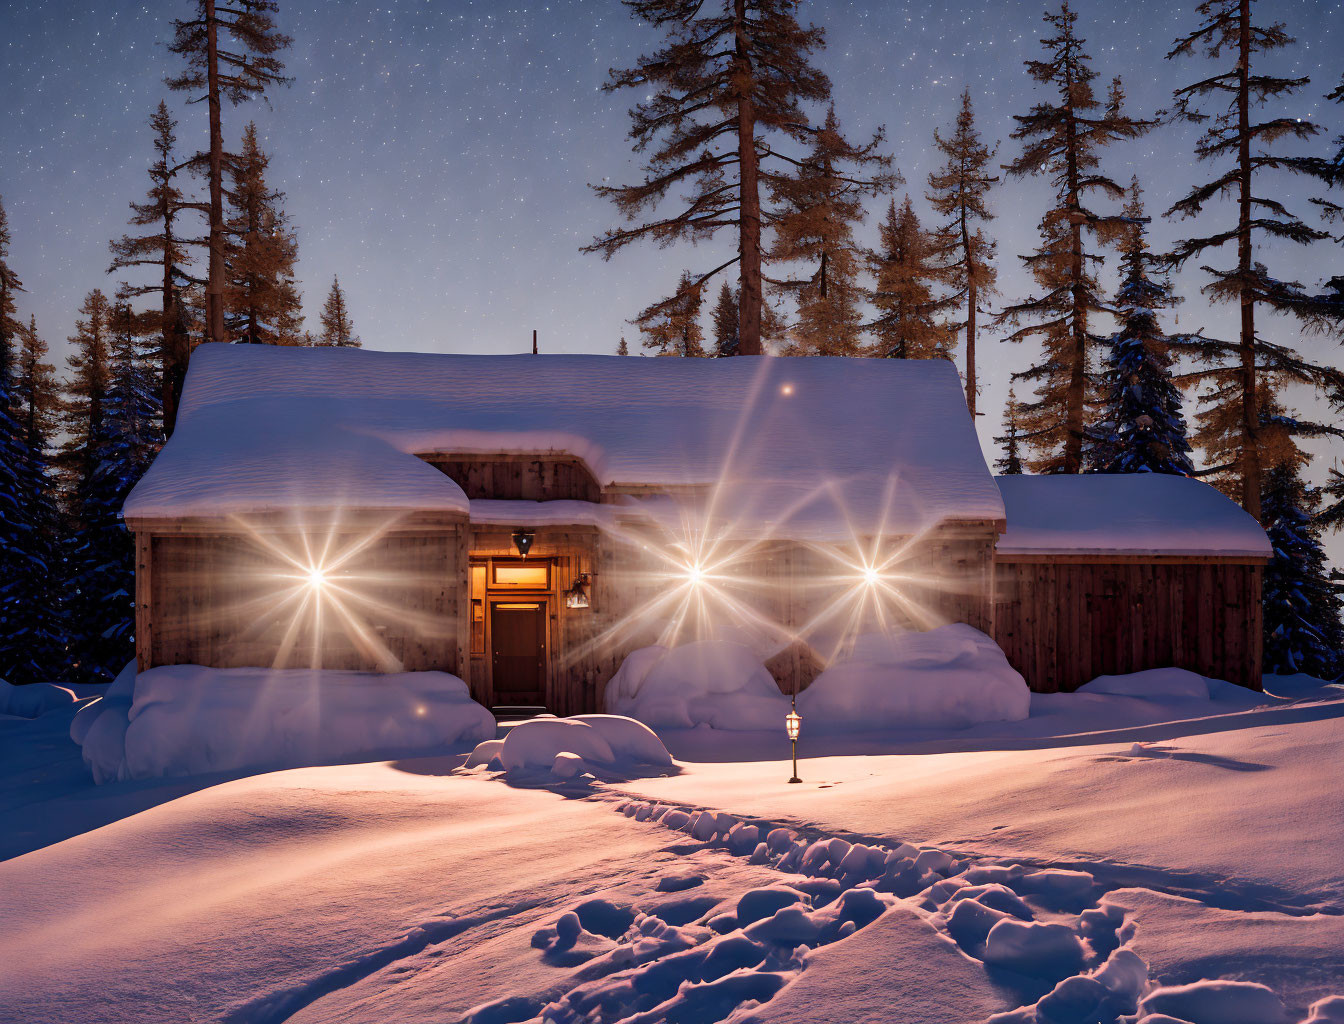 Snow-covered cabin at night with glowing windows in pine forest.